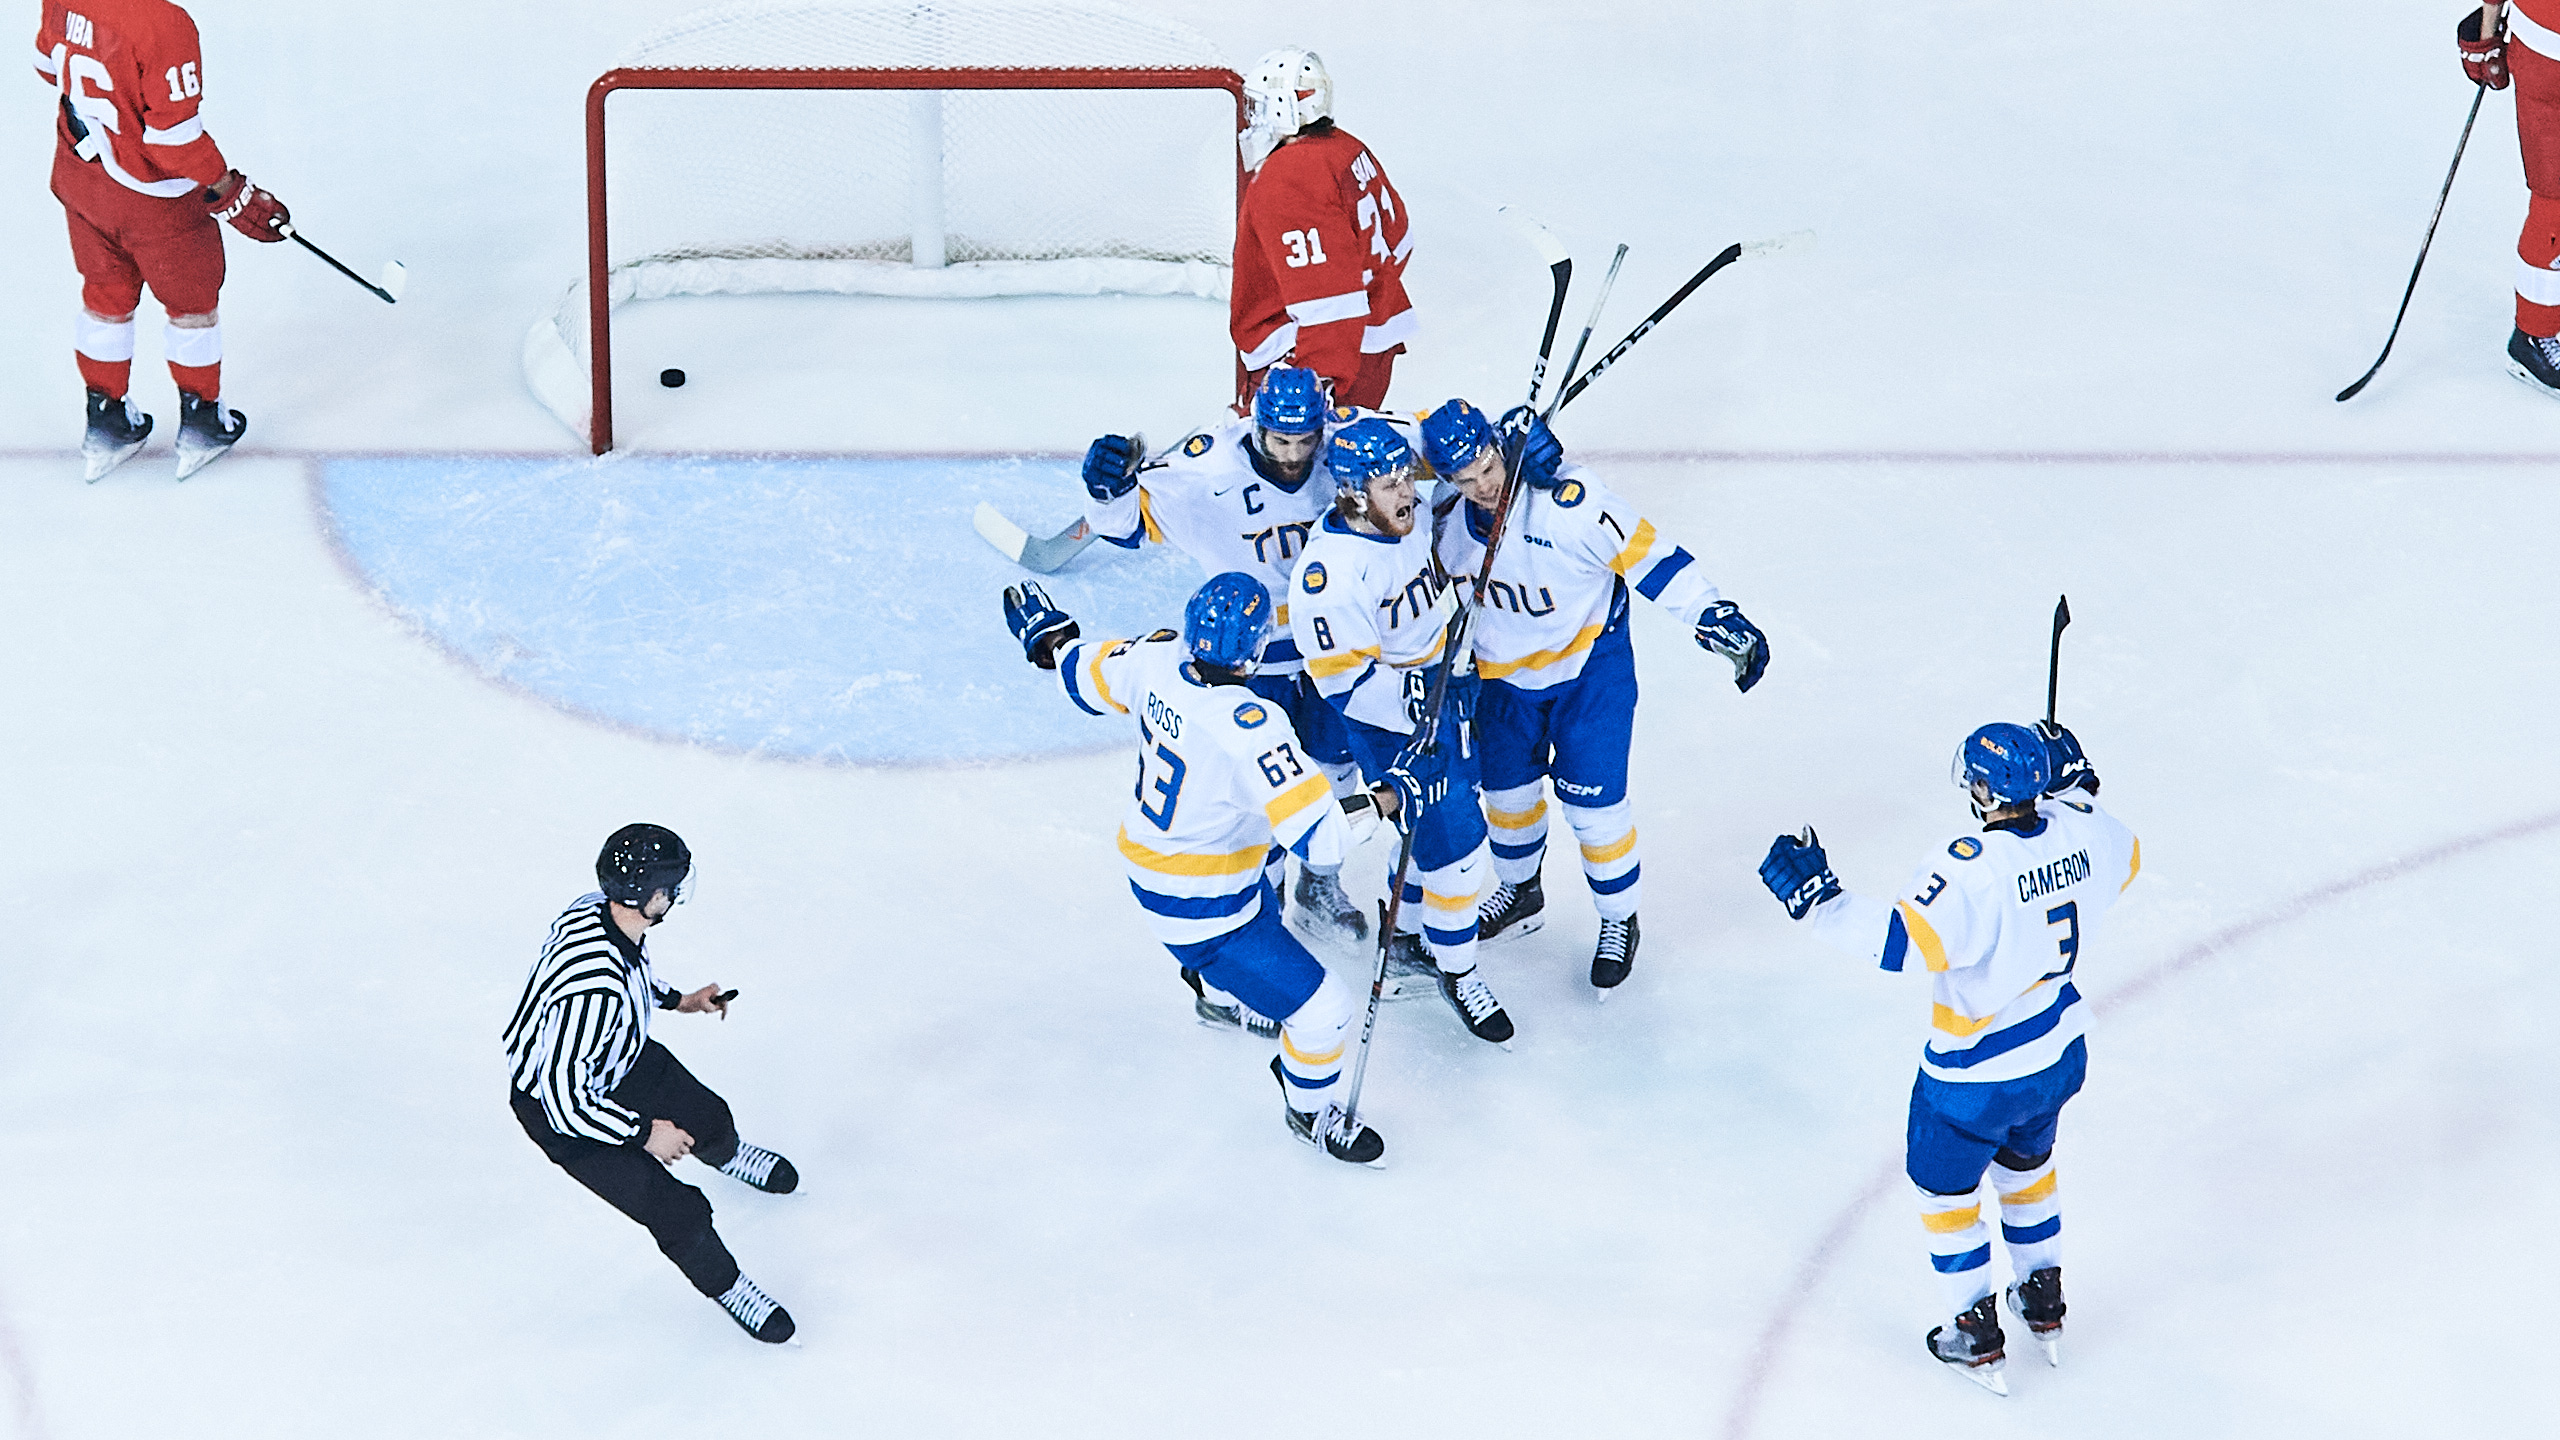 A group of TMU Bold men's hockey players celebrate in a huddle together after scoring a goal. The puck can be seen in the McGill net